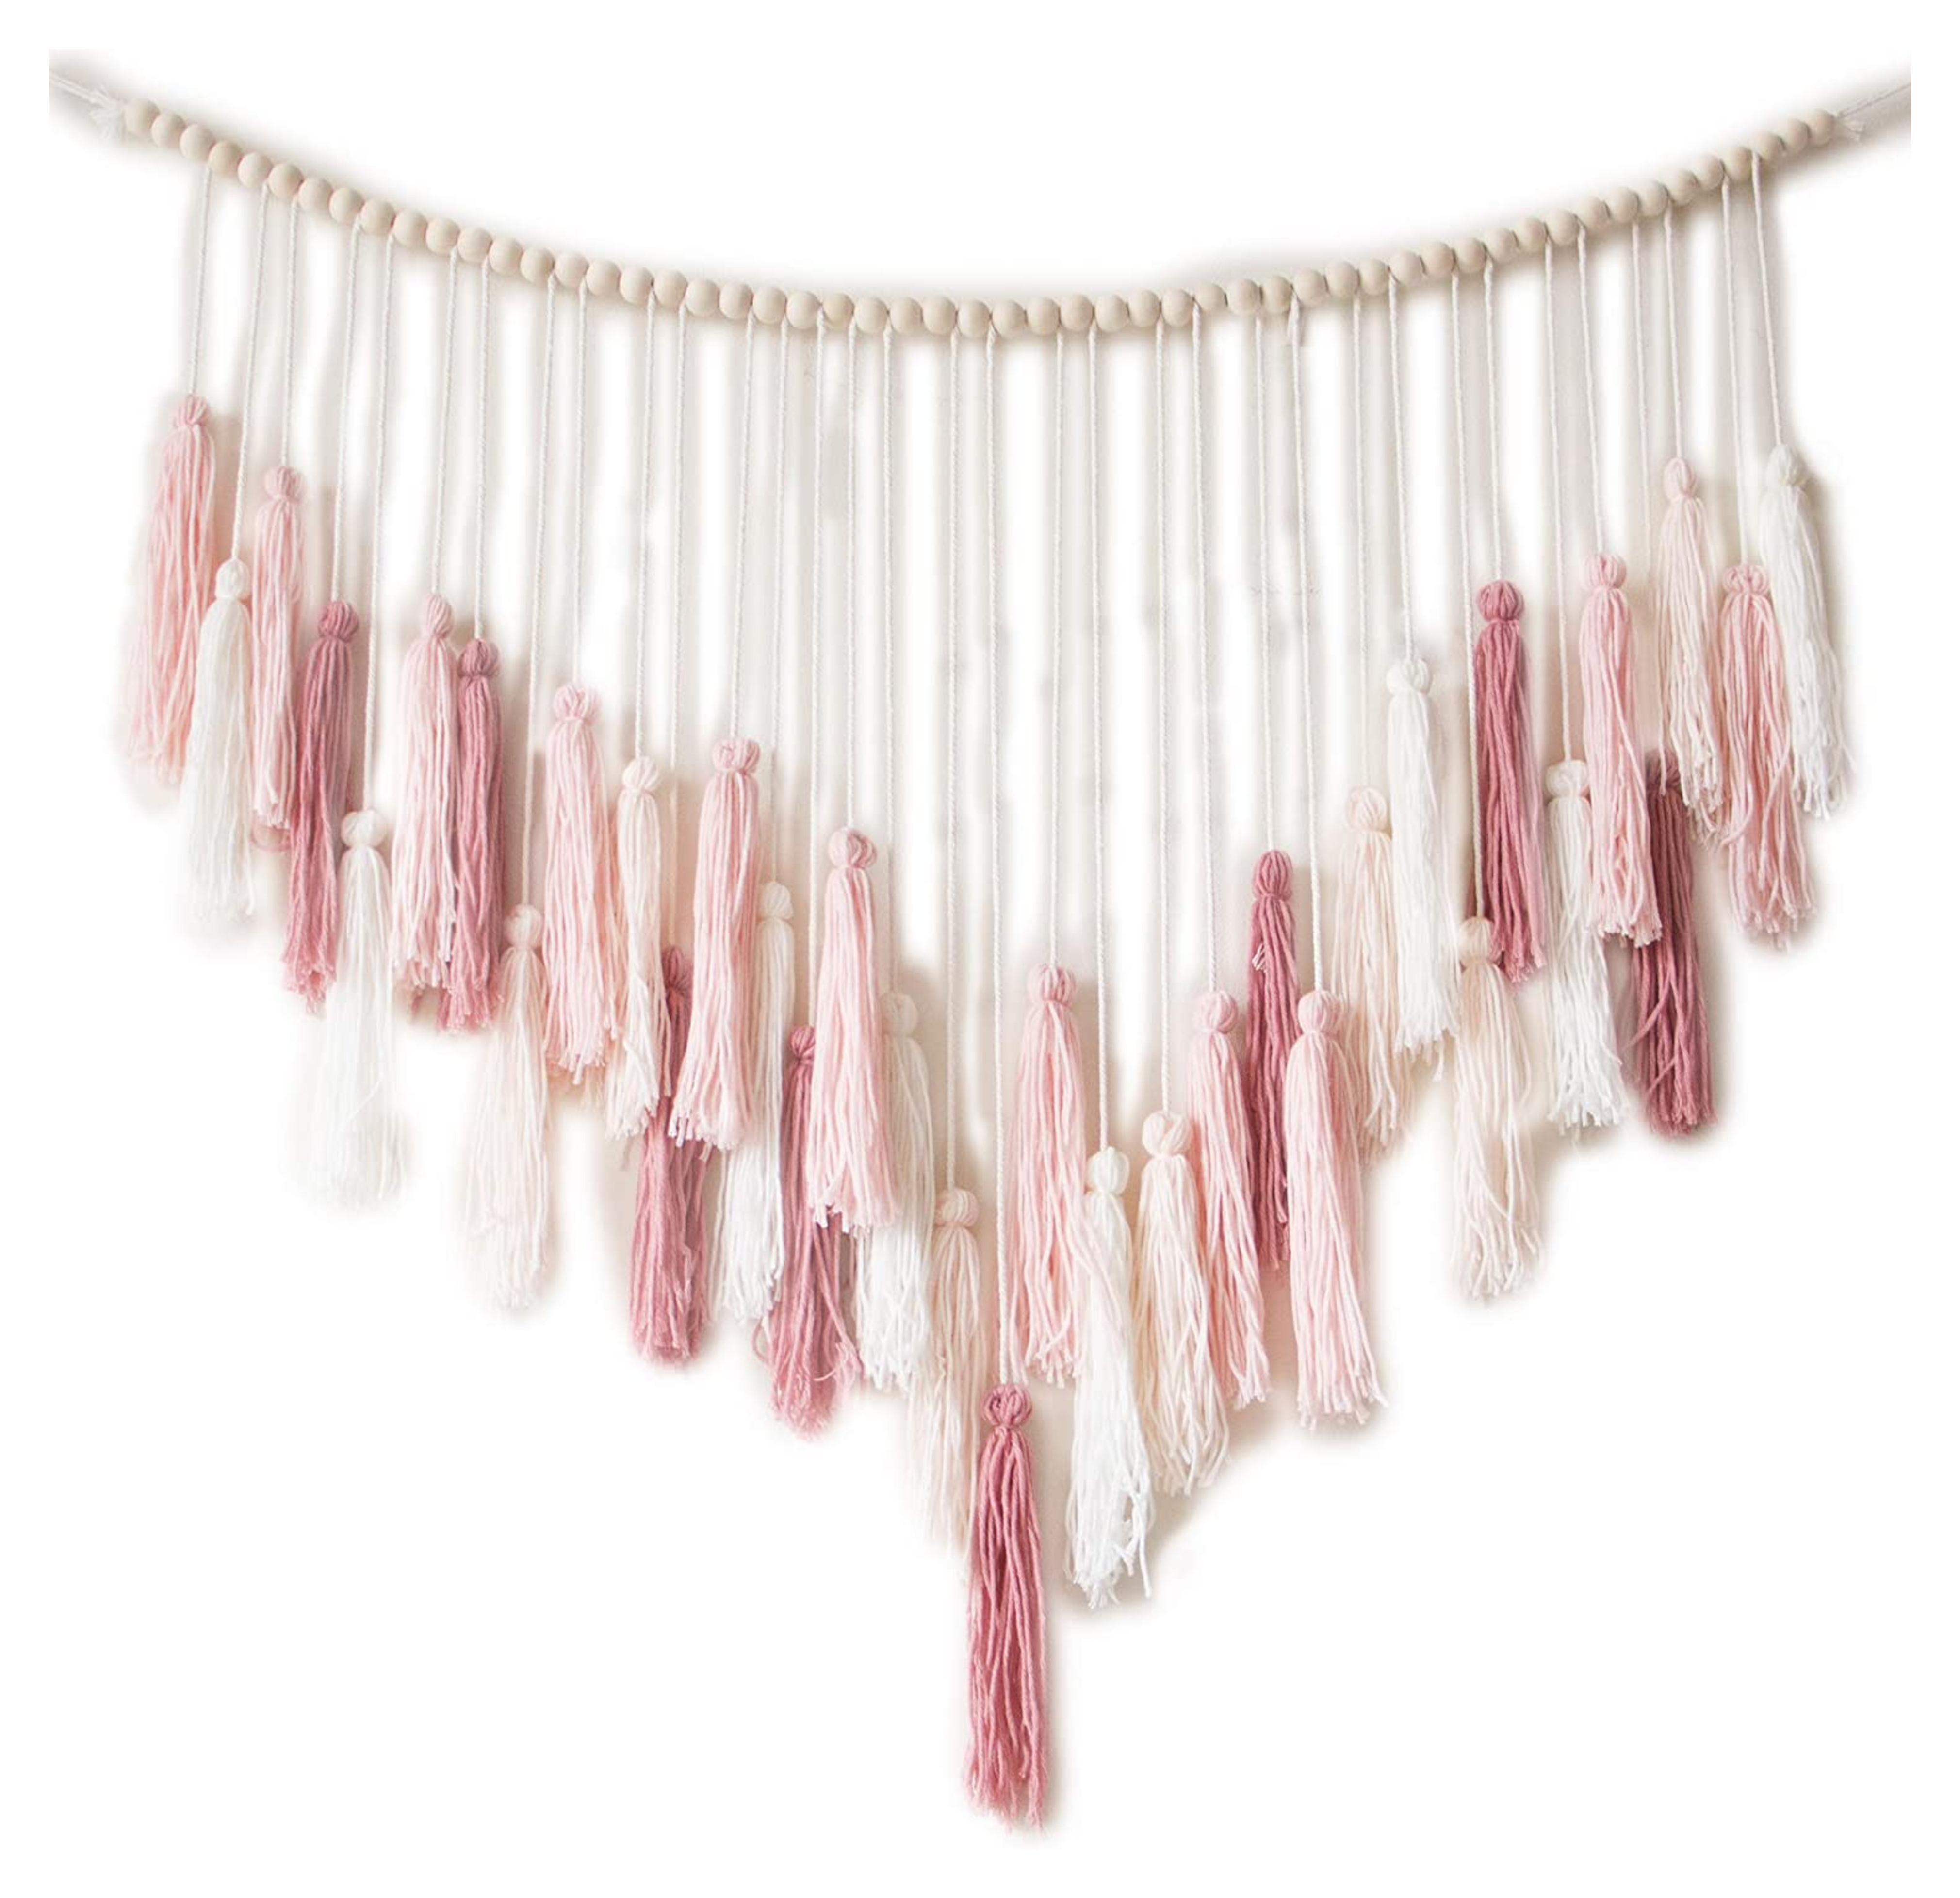 Decocove Macrame Wall Hanging - Large Macrame Wall Hanging with Wood Beads - Bohemian Wall Decor for Bedroom, Living Room and Kitchen - Warm Blush Pink - 35'' x 36''